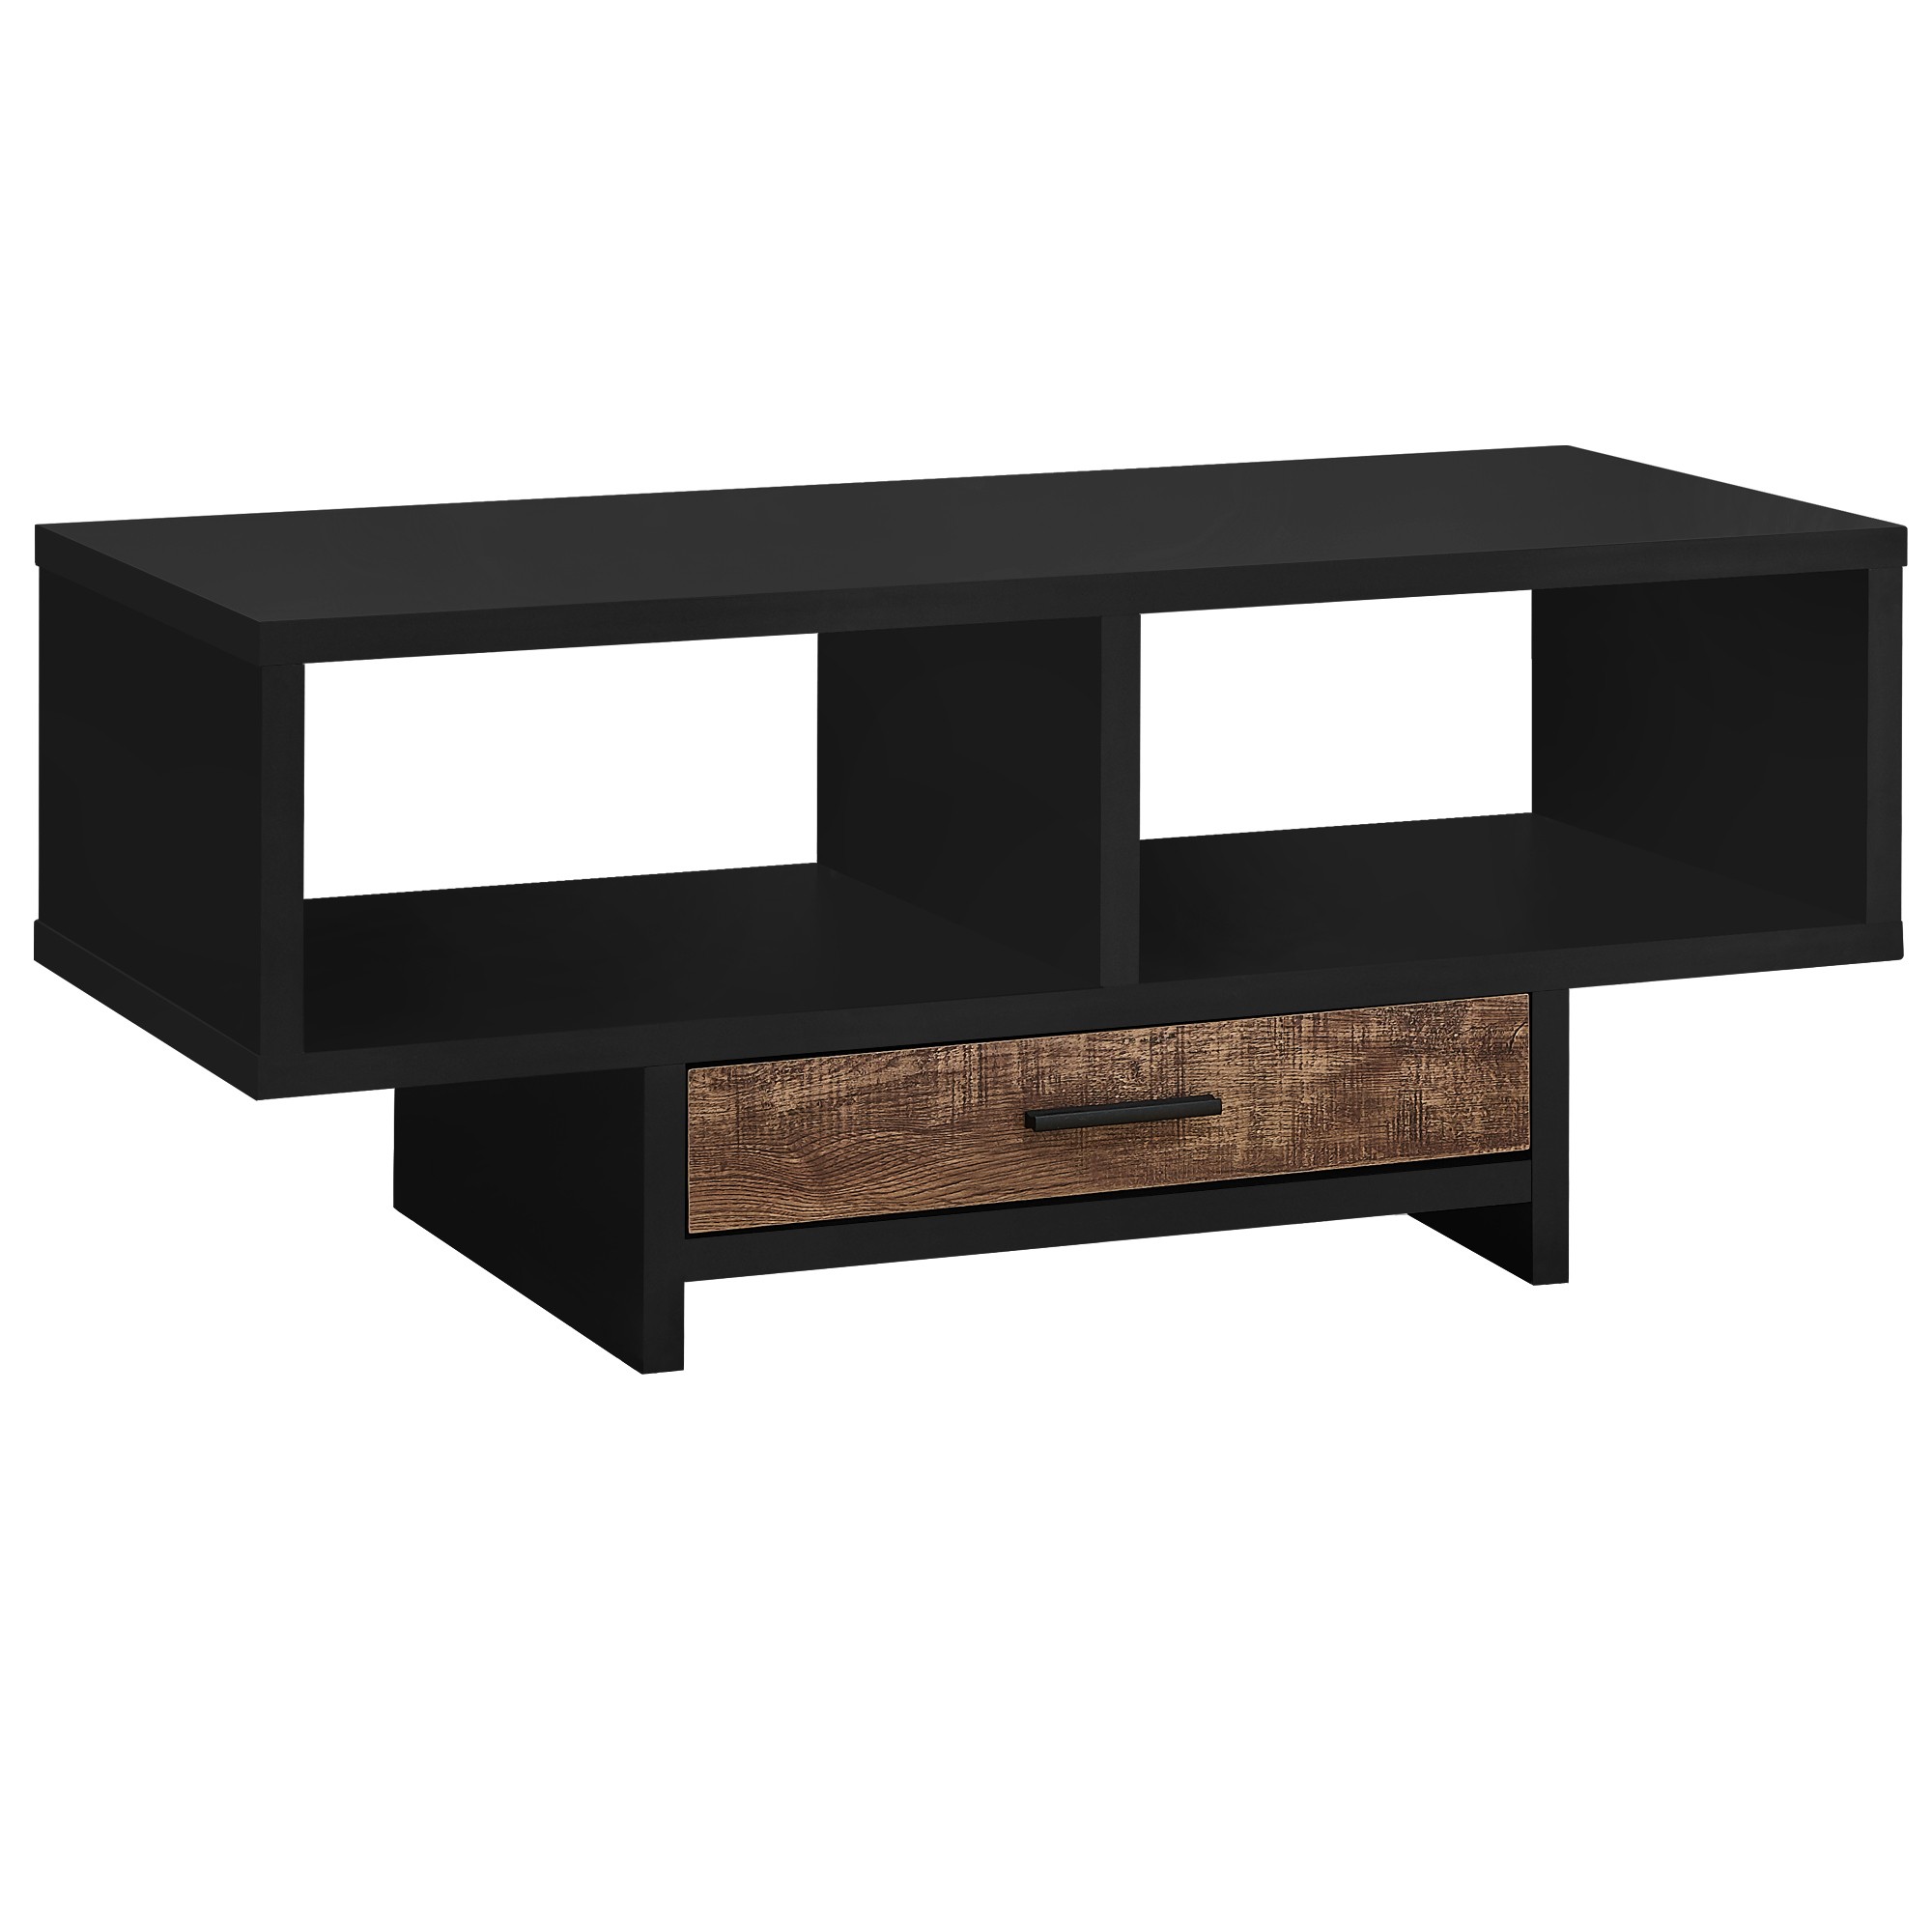 17.75" x 42.25" x 18" Black Brown Particle Board Hollow Core Coffee Table